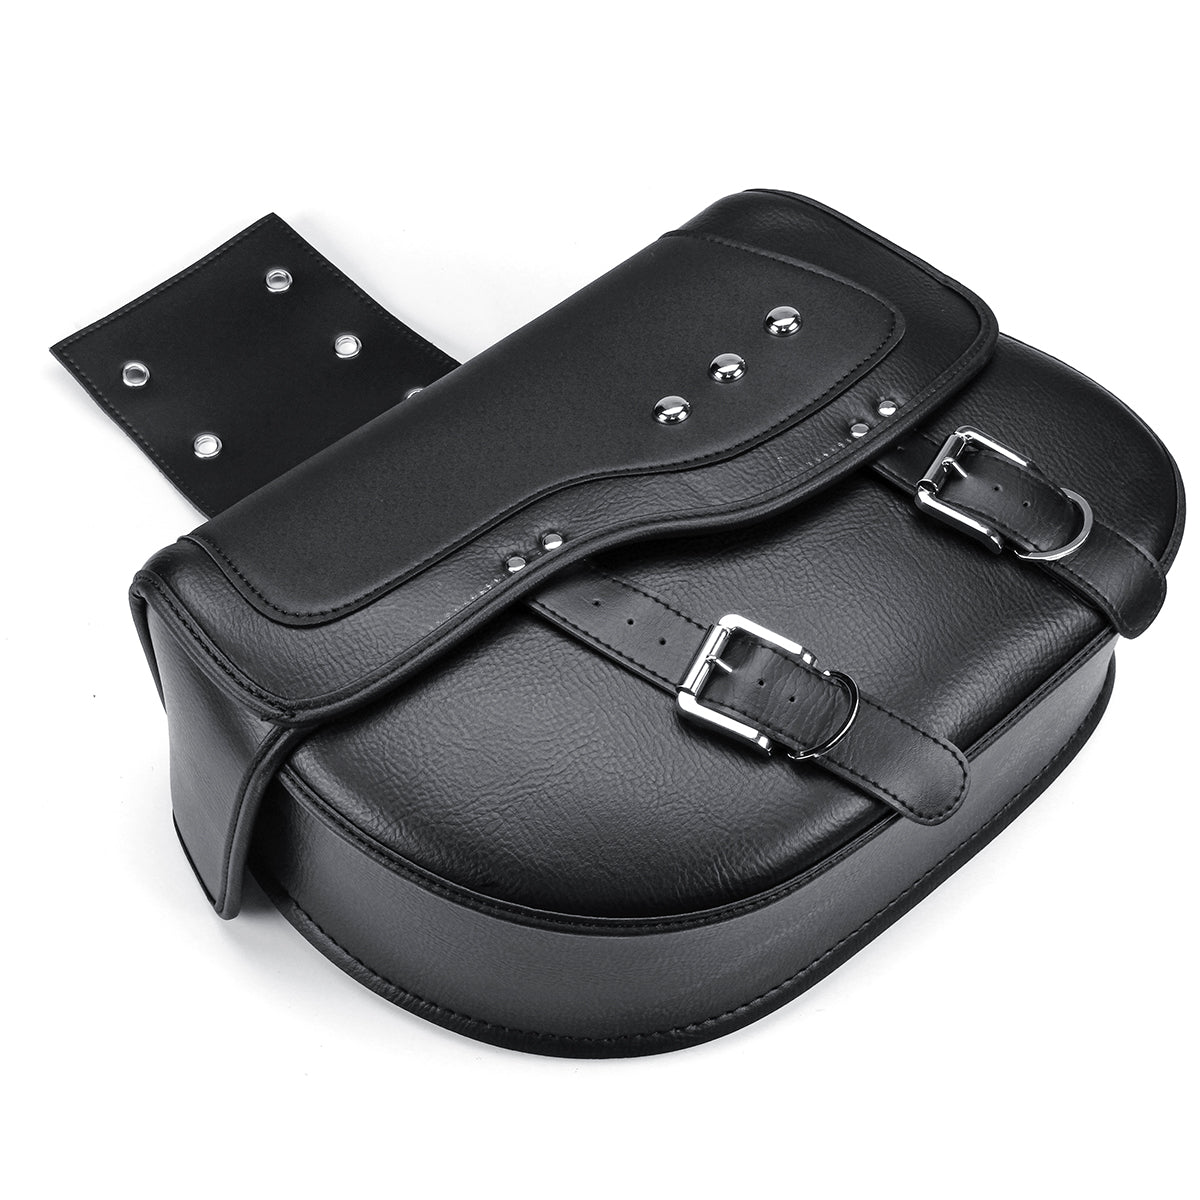 Dim Gray Motorcycle PU Leather Luggage Saddlebags Black For Sportster XL883 1200